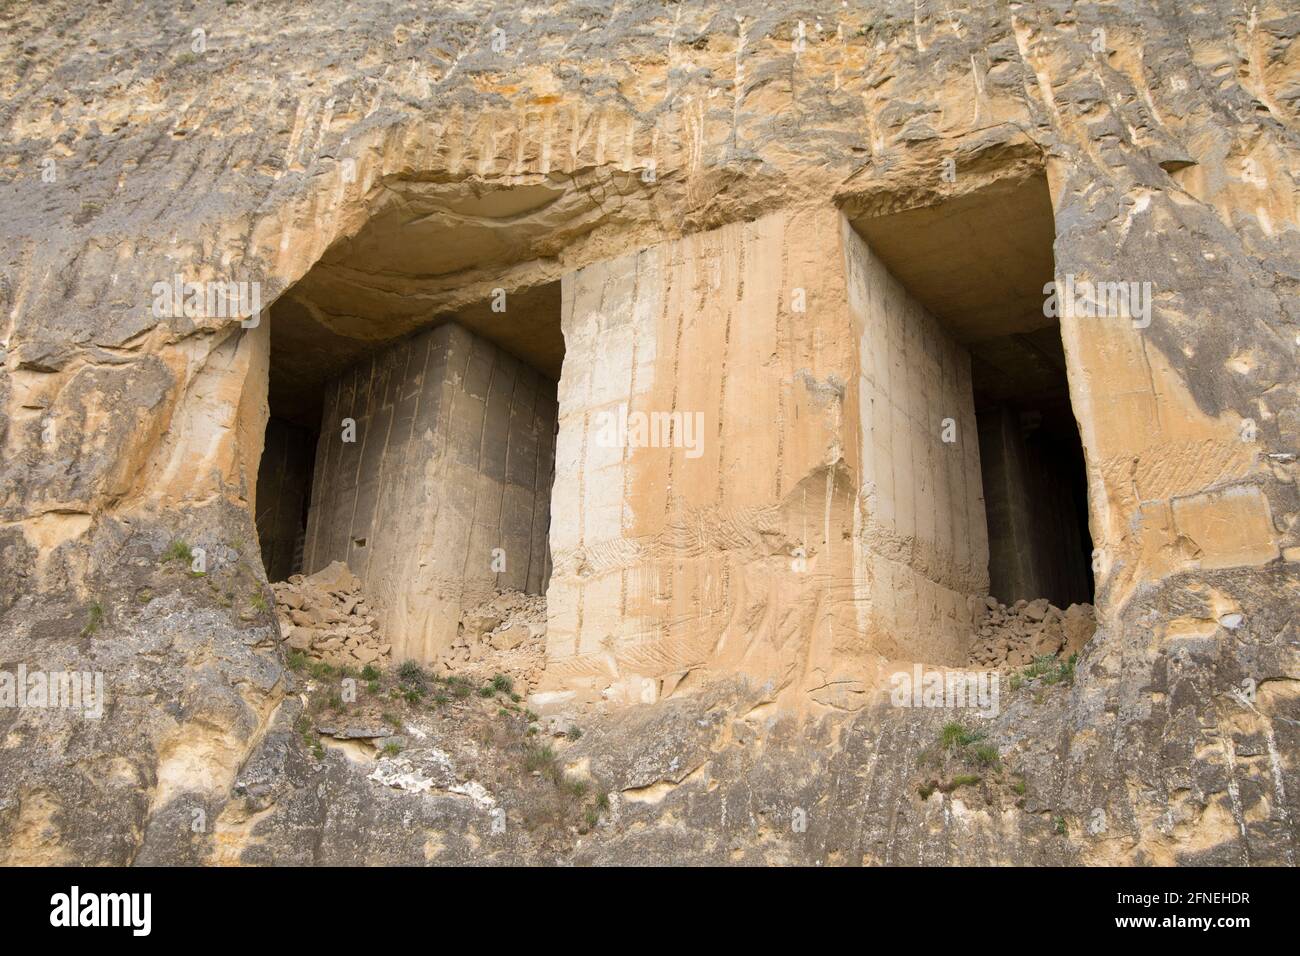 Caves made by men during the exploration of the cement quarry (now closed and open for public) at the Sint-Pieterserg in Maastricht, Netherlands Stock Photo